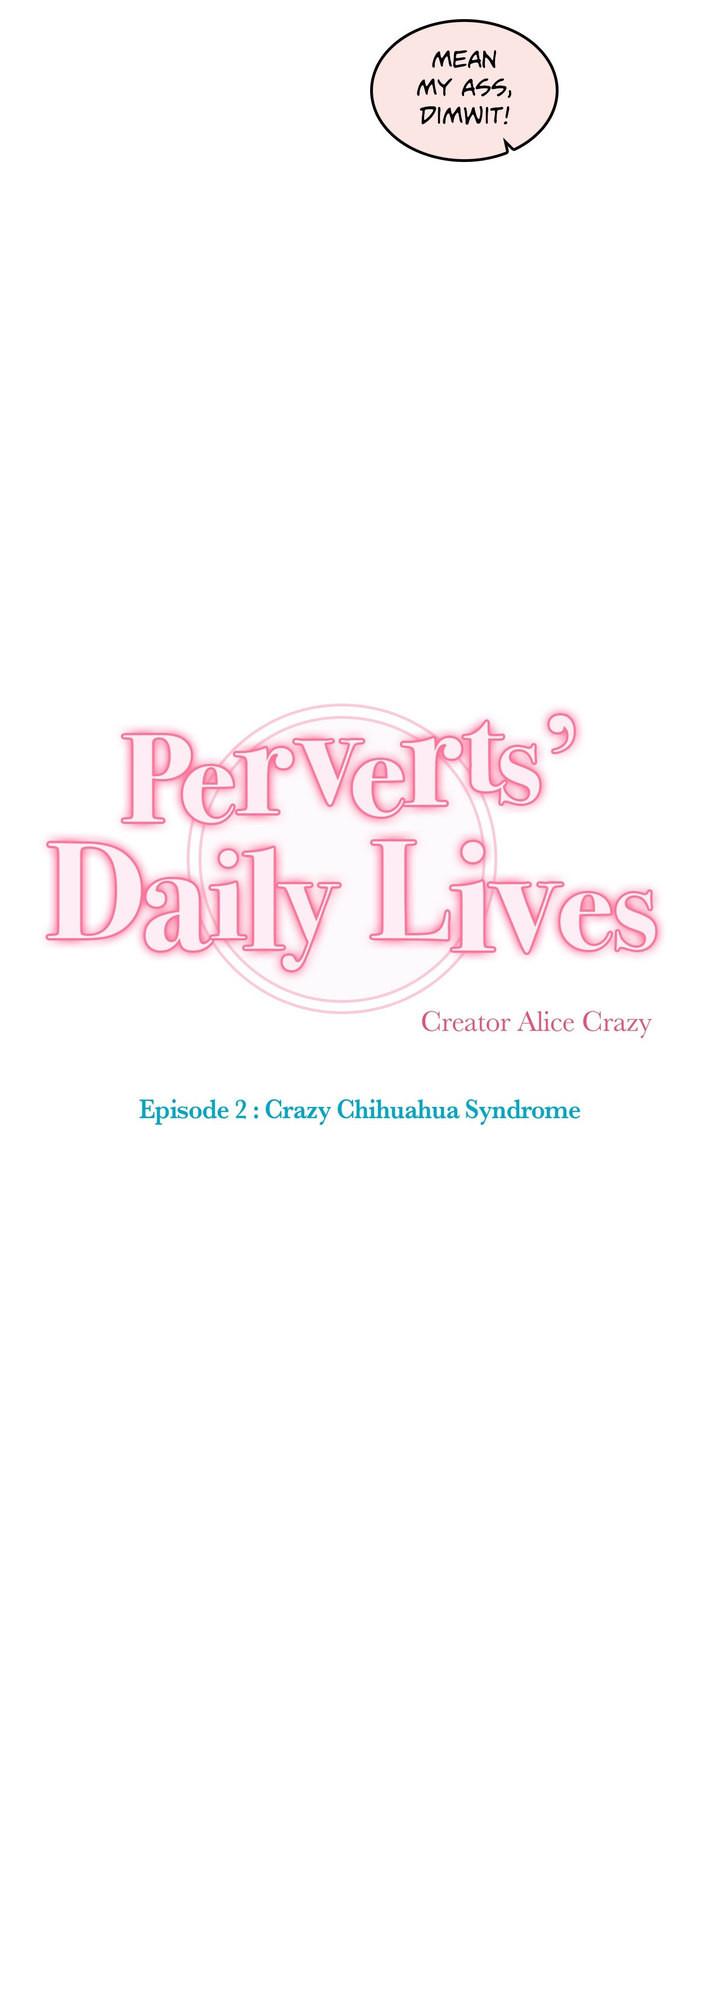 Perverts' Daily Lives Episode 2: Crazy Chihuahua Syndrome 223